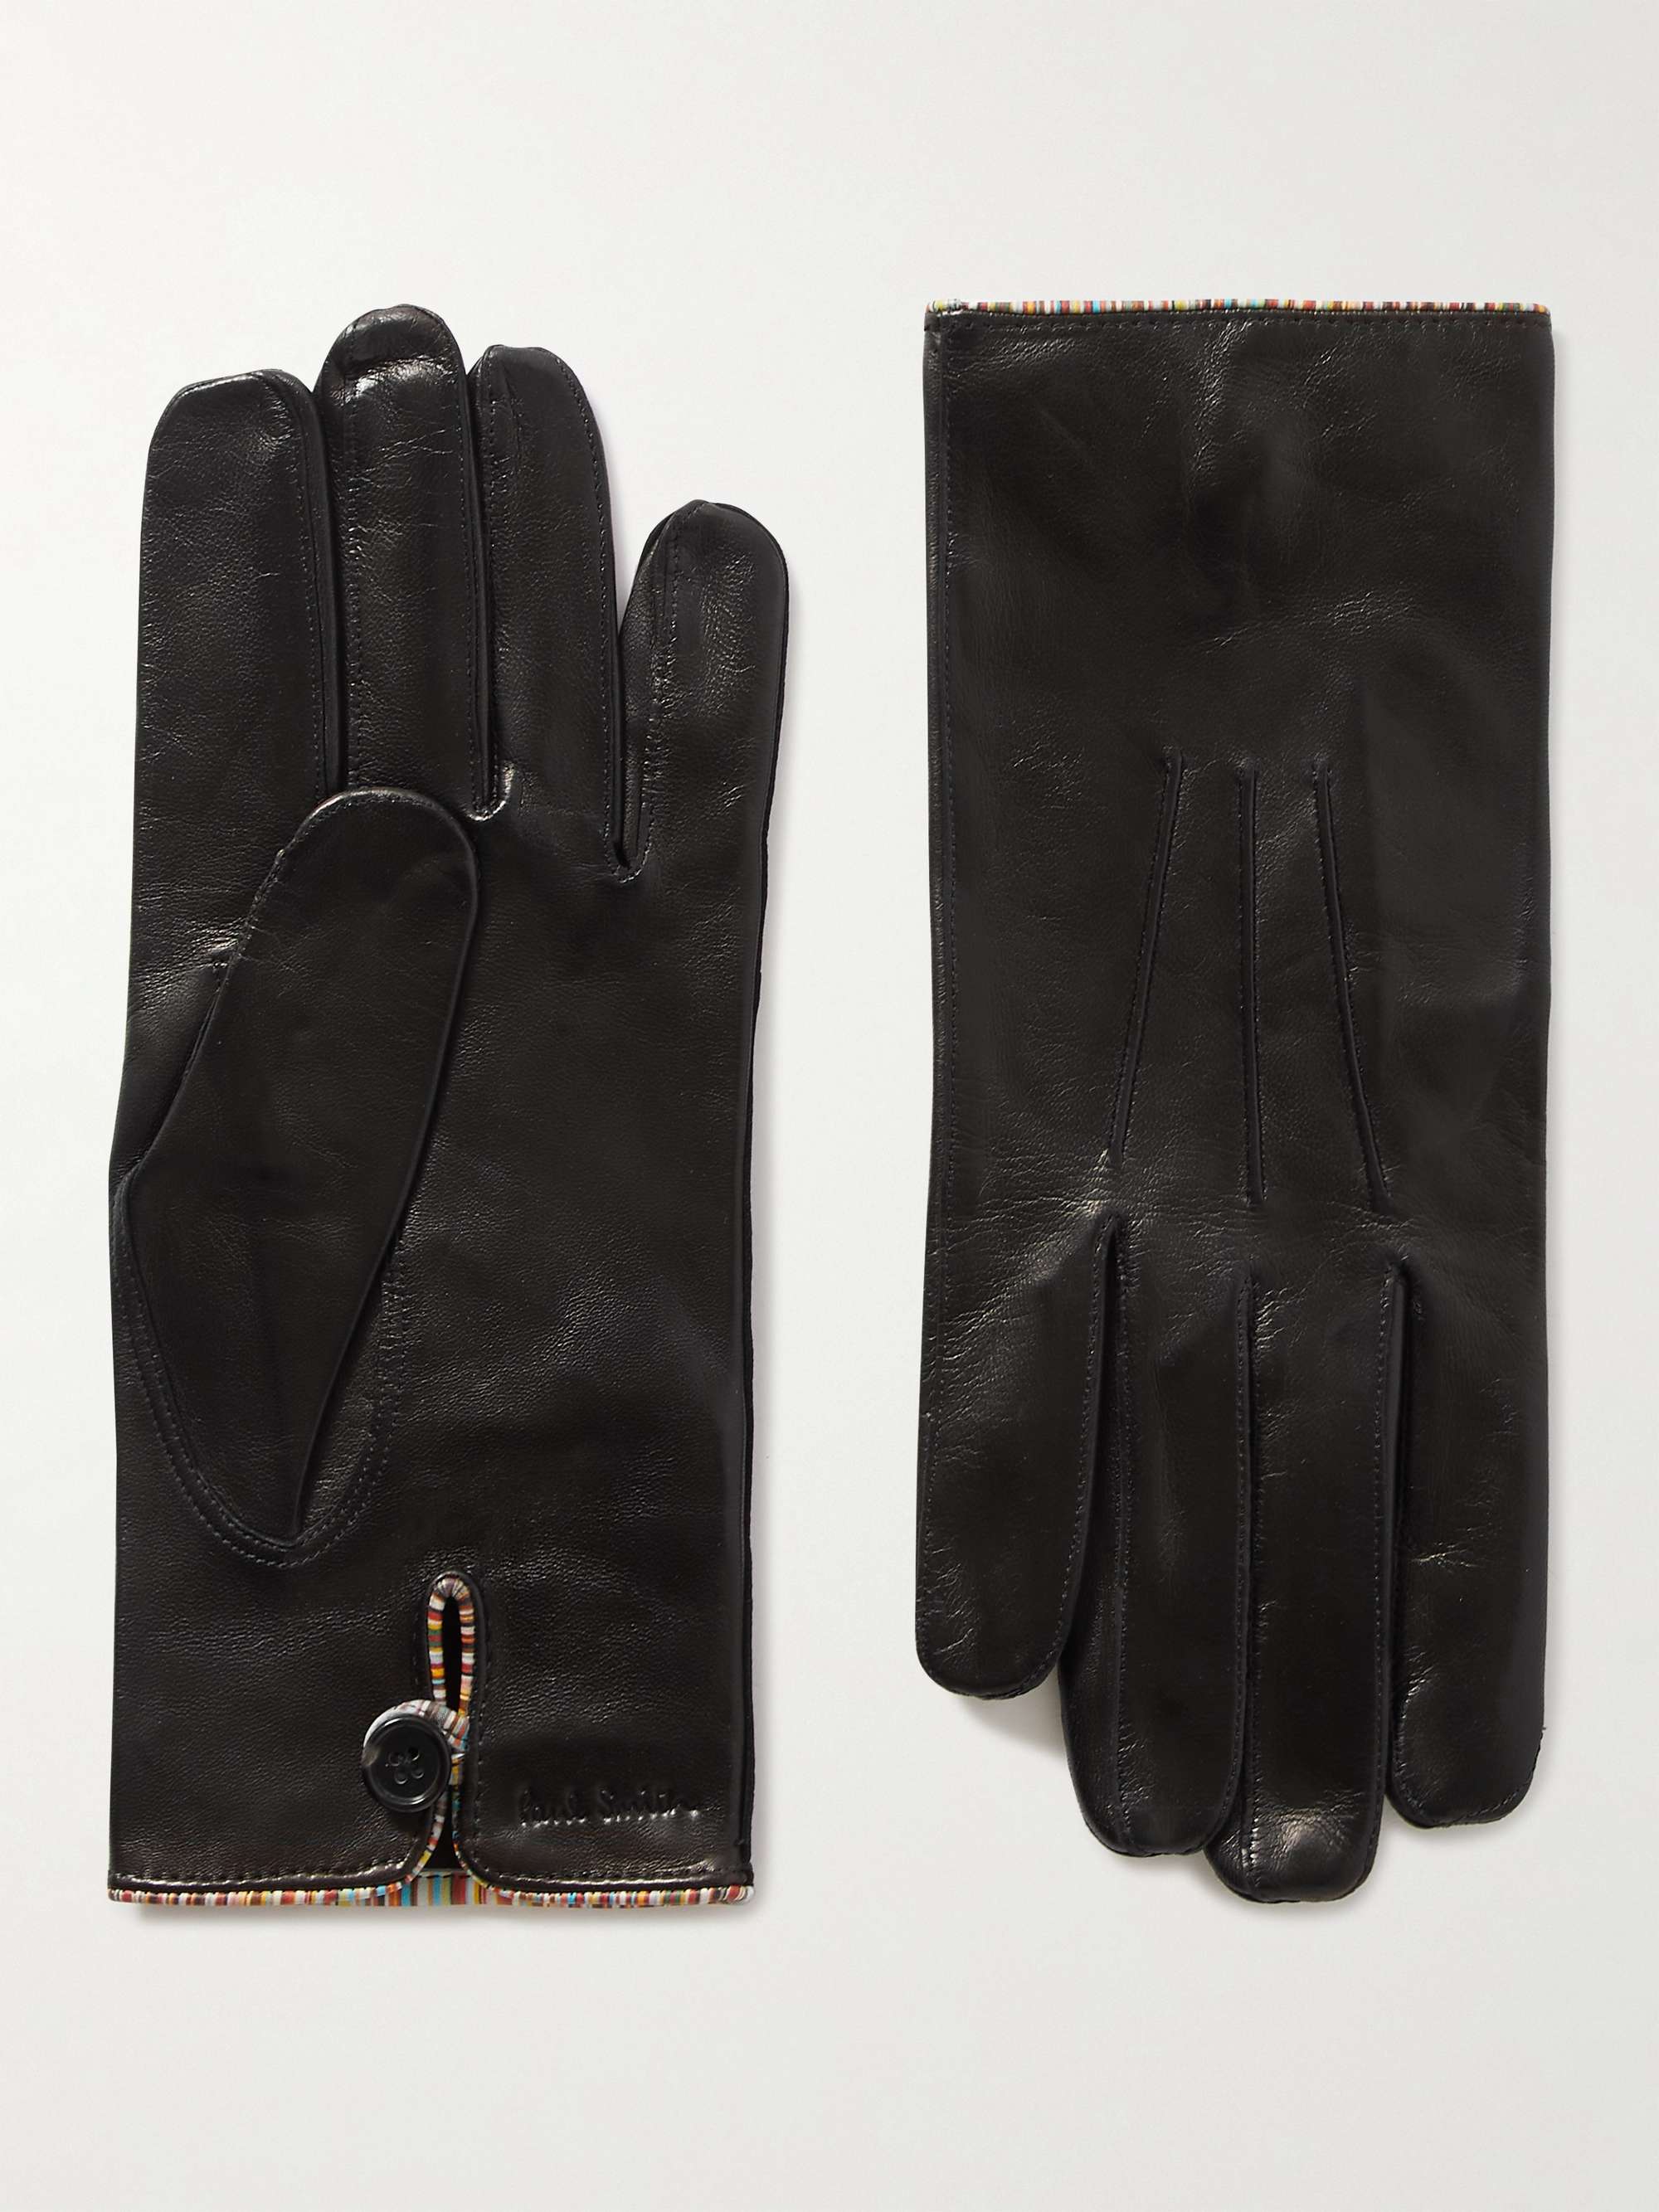 PAUL SMITH Stripe-Trimmed Leather Gloves